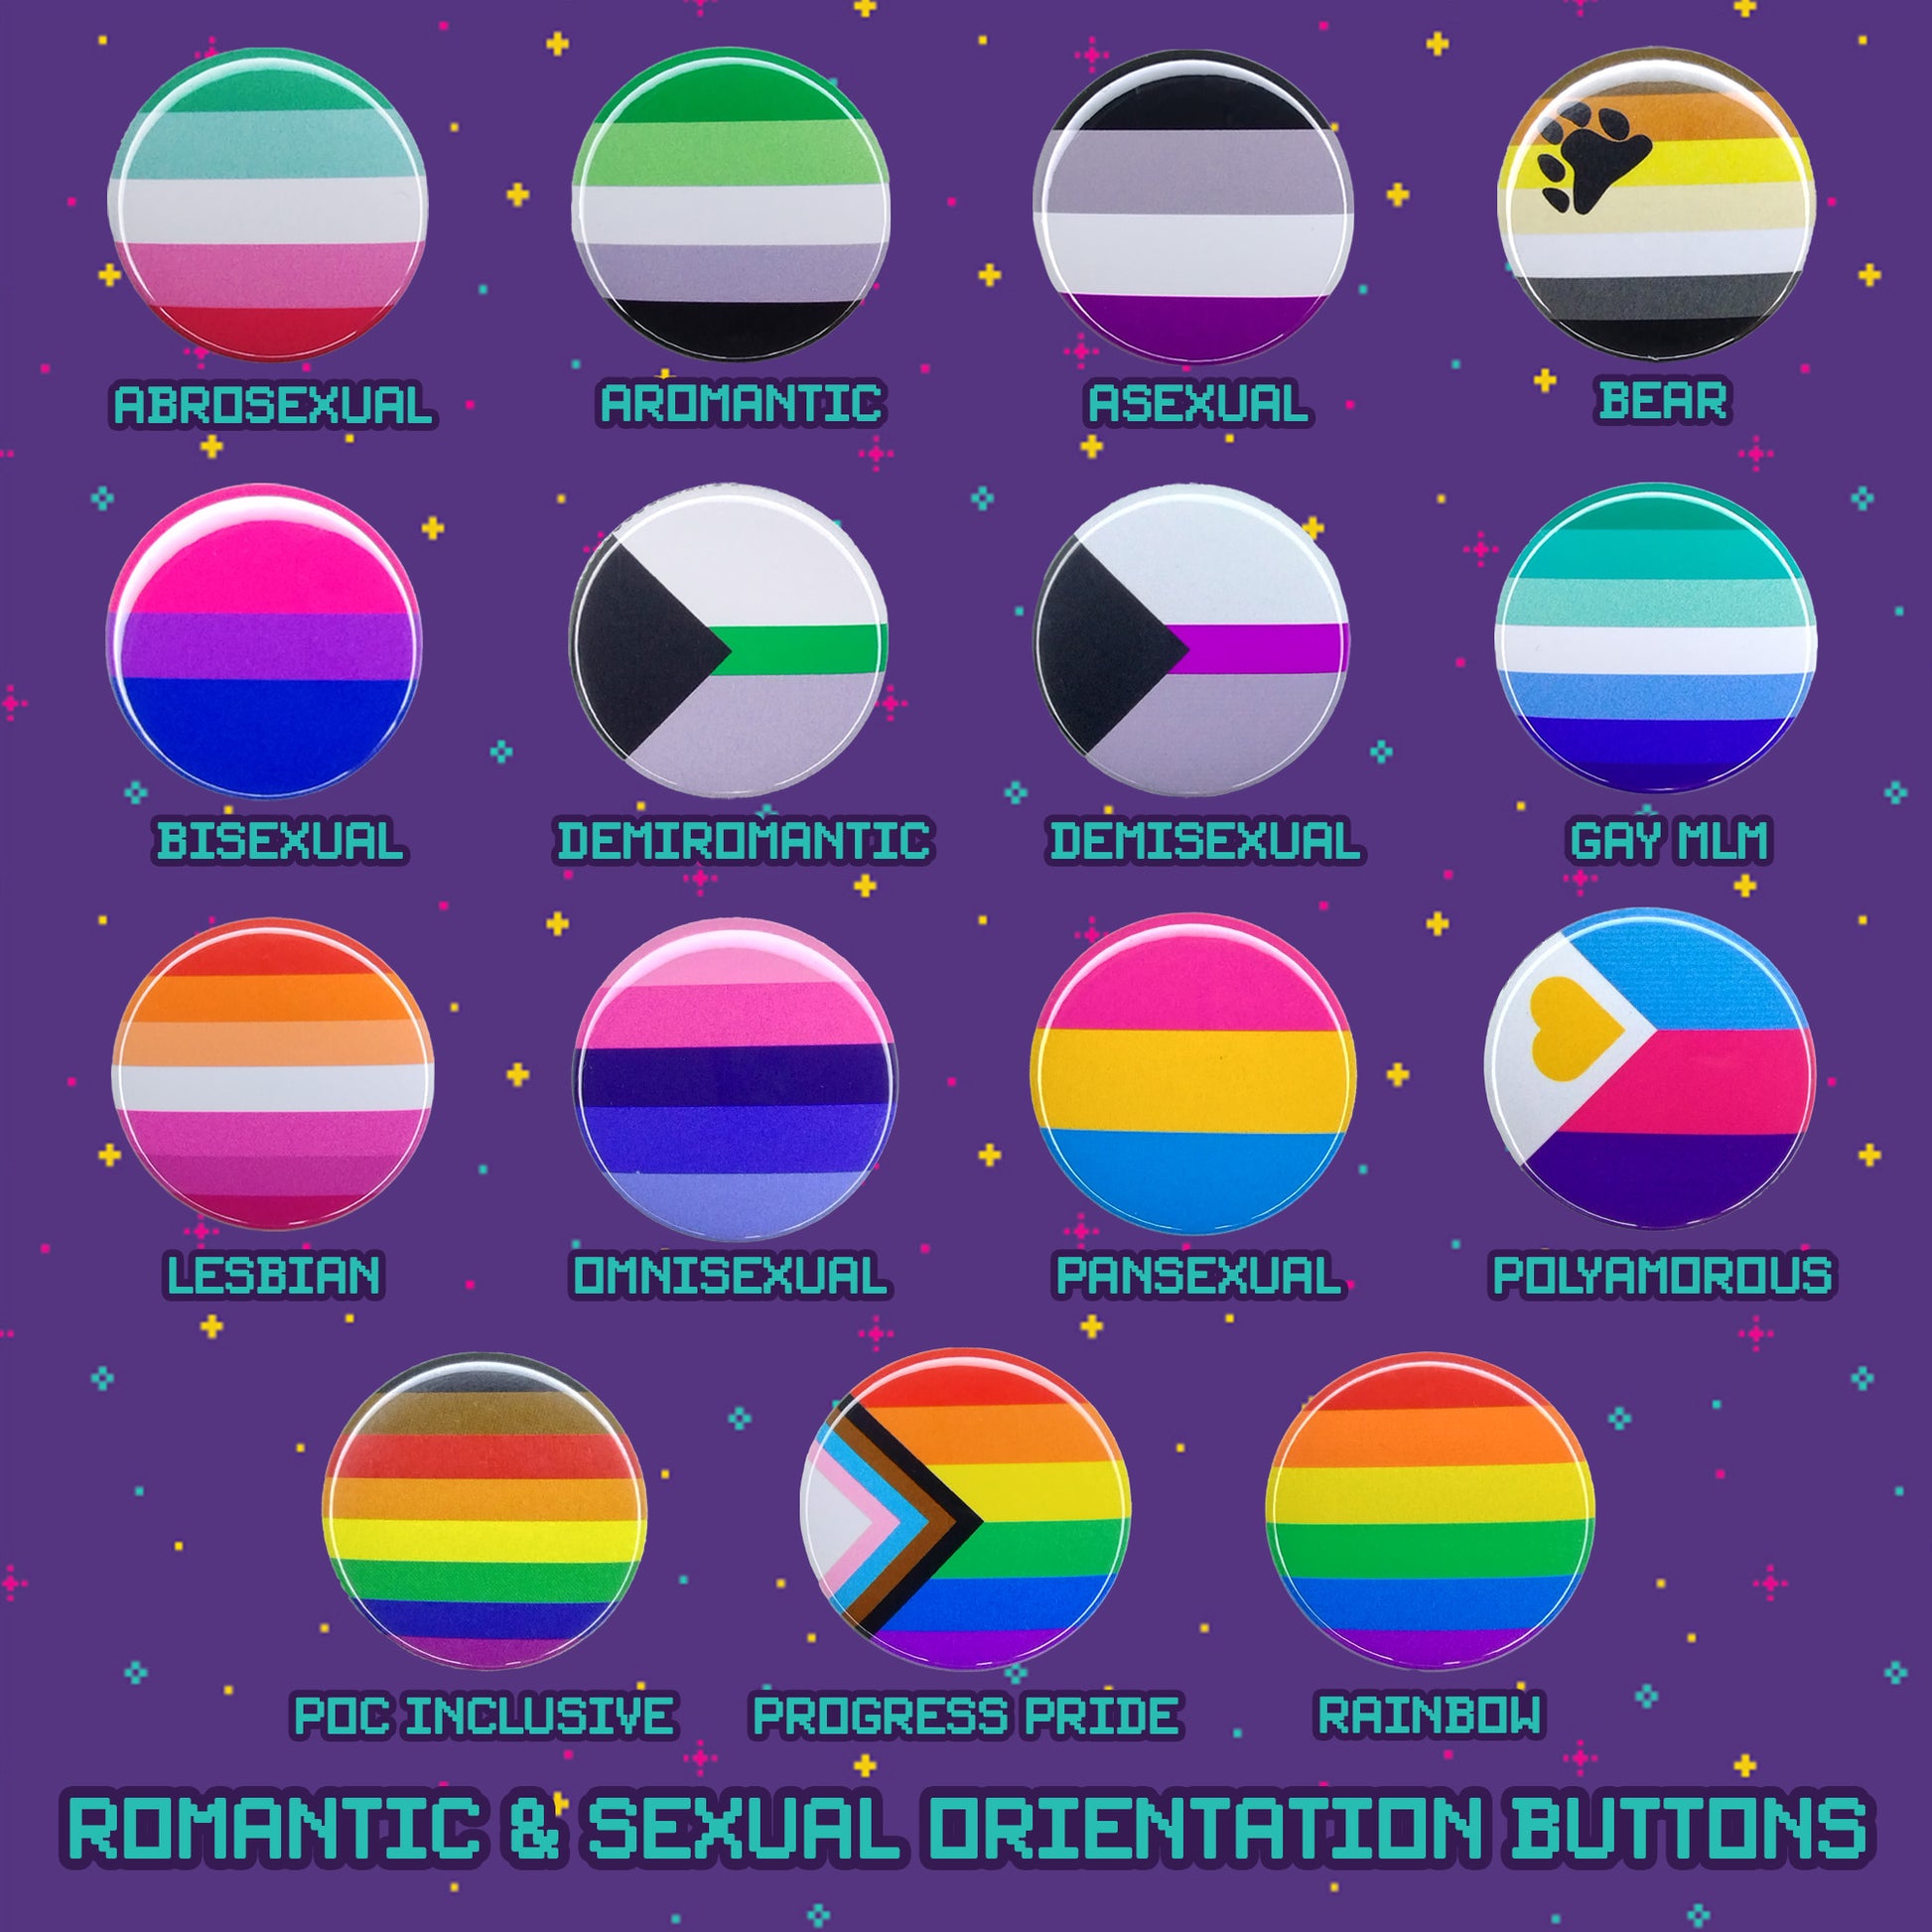 all the romantic and sexual orientation buttons including abrosexual, aromantic, asexual, bear, bisexual, demiromantic, demisexual, gay mlm, lesbian, omnisexual, pansexual, polyamorous, poc inclusive, progress pride, and rainbow